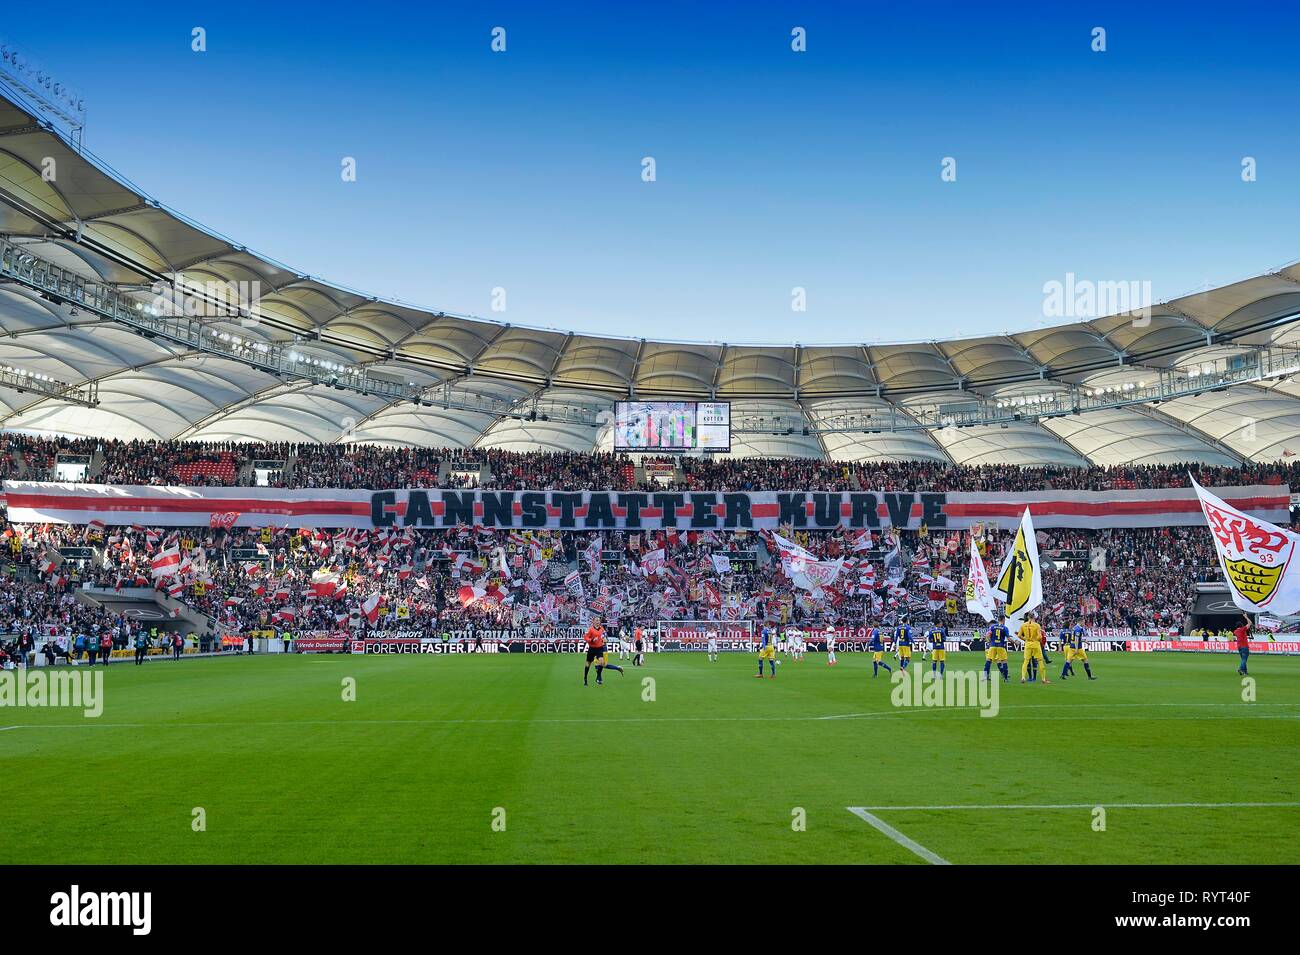 Fans, fan curve in Cannstatter Kurve with sea of flags at football match, Mercedes-Benz Arena, Stuttgart, Baden-Württemberg Stock Photo